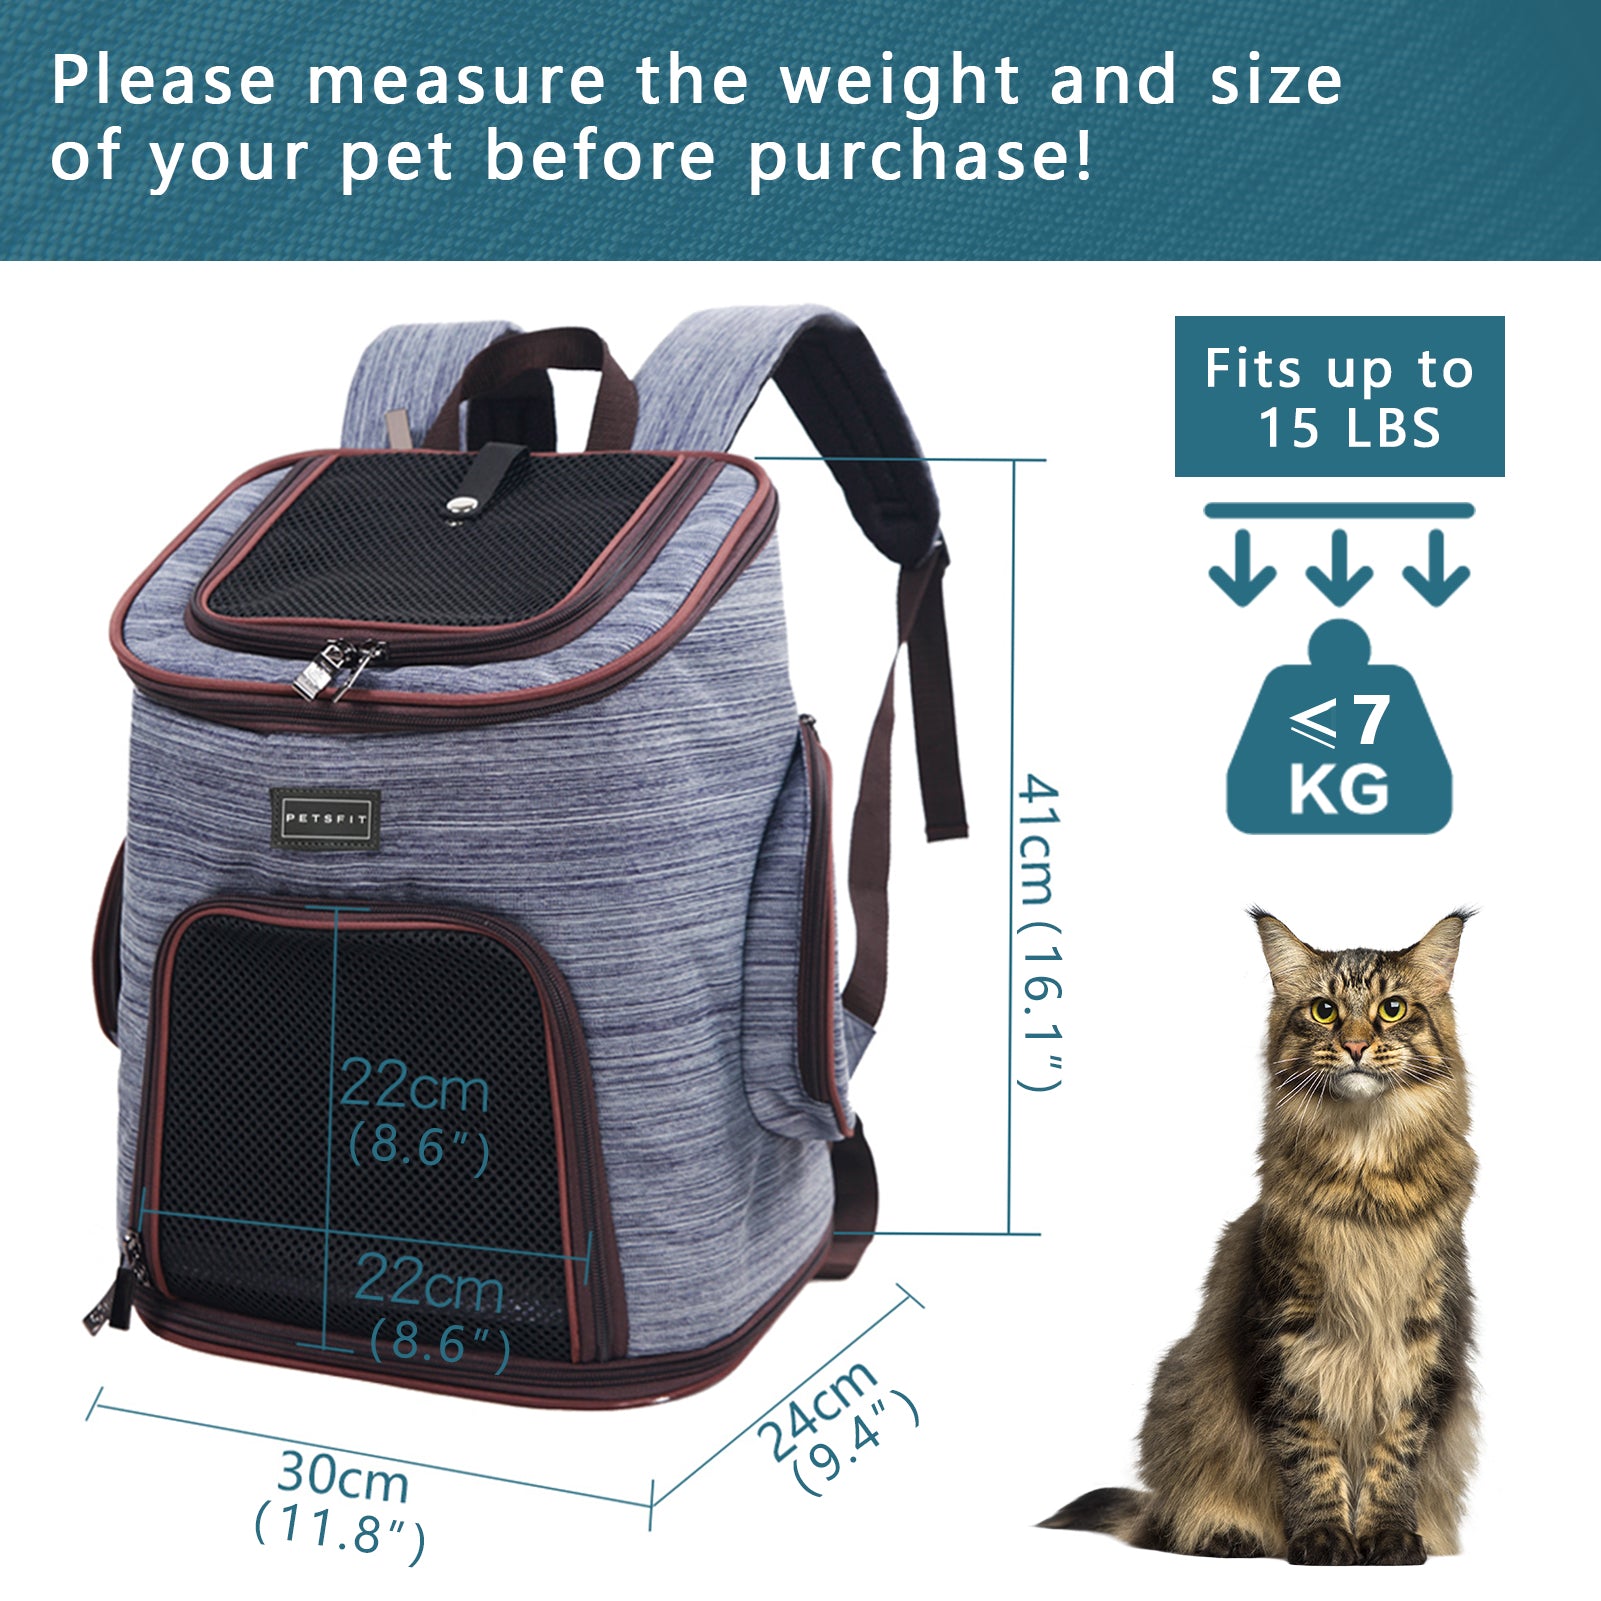 petsfit-dog-backpack-carrier-for-small-dogs-cats-rabbits-adjustable-dog-front-carrier-with-breathable-head-out-design-collapsible-dogs-transport-backpack-for-travel-hiking-and-cycling-outdoor-use-03